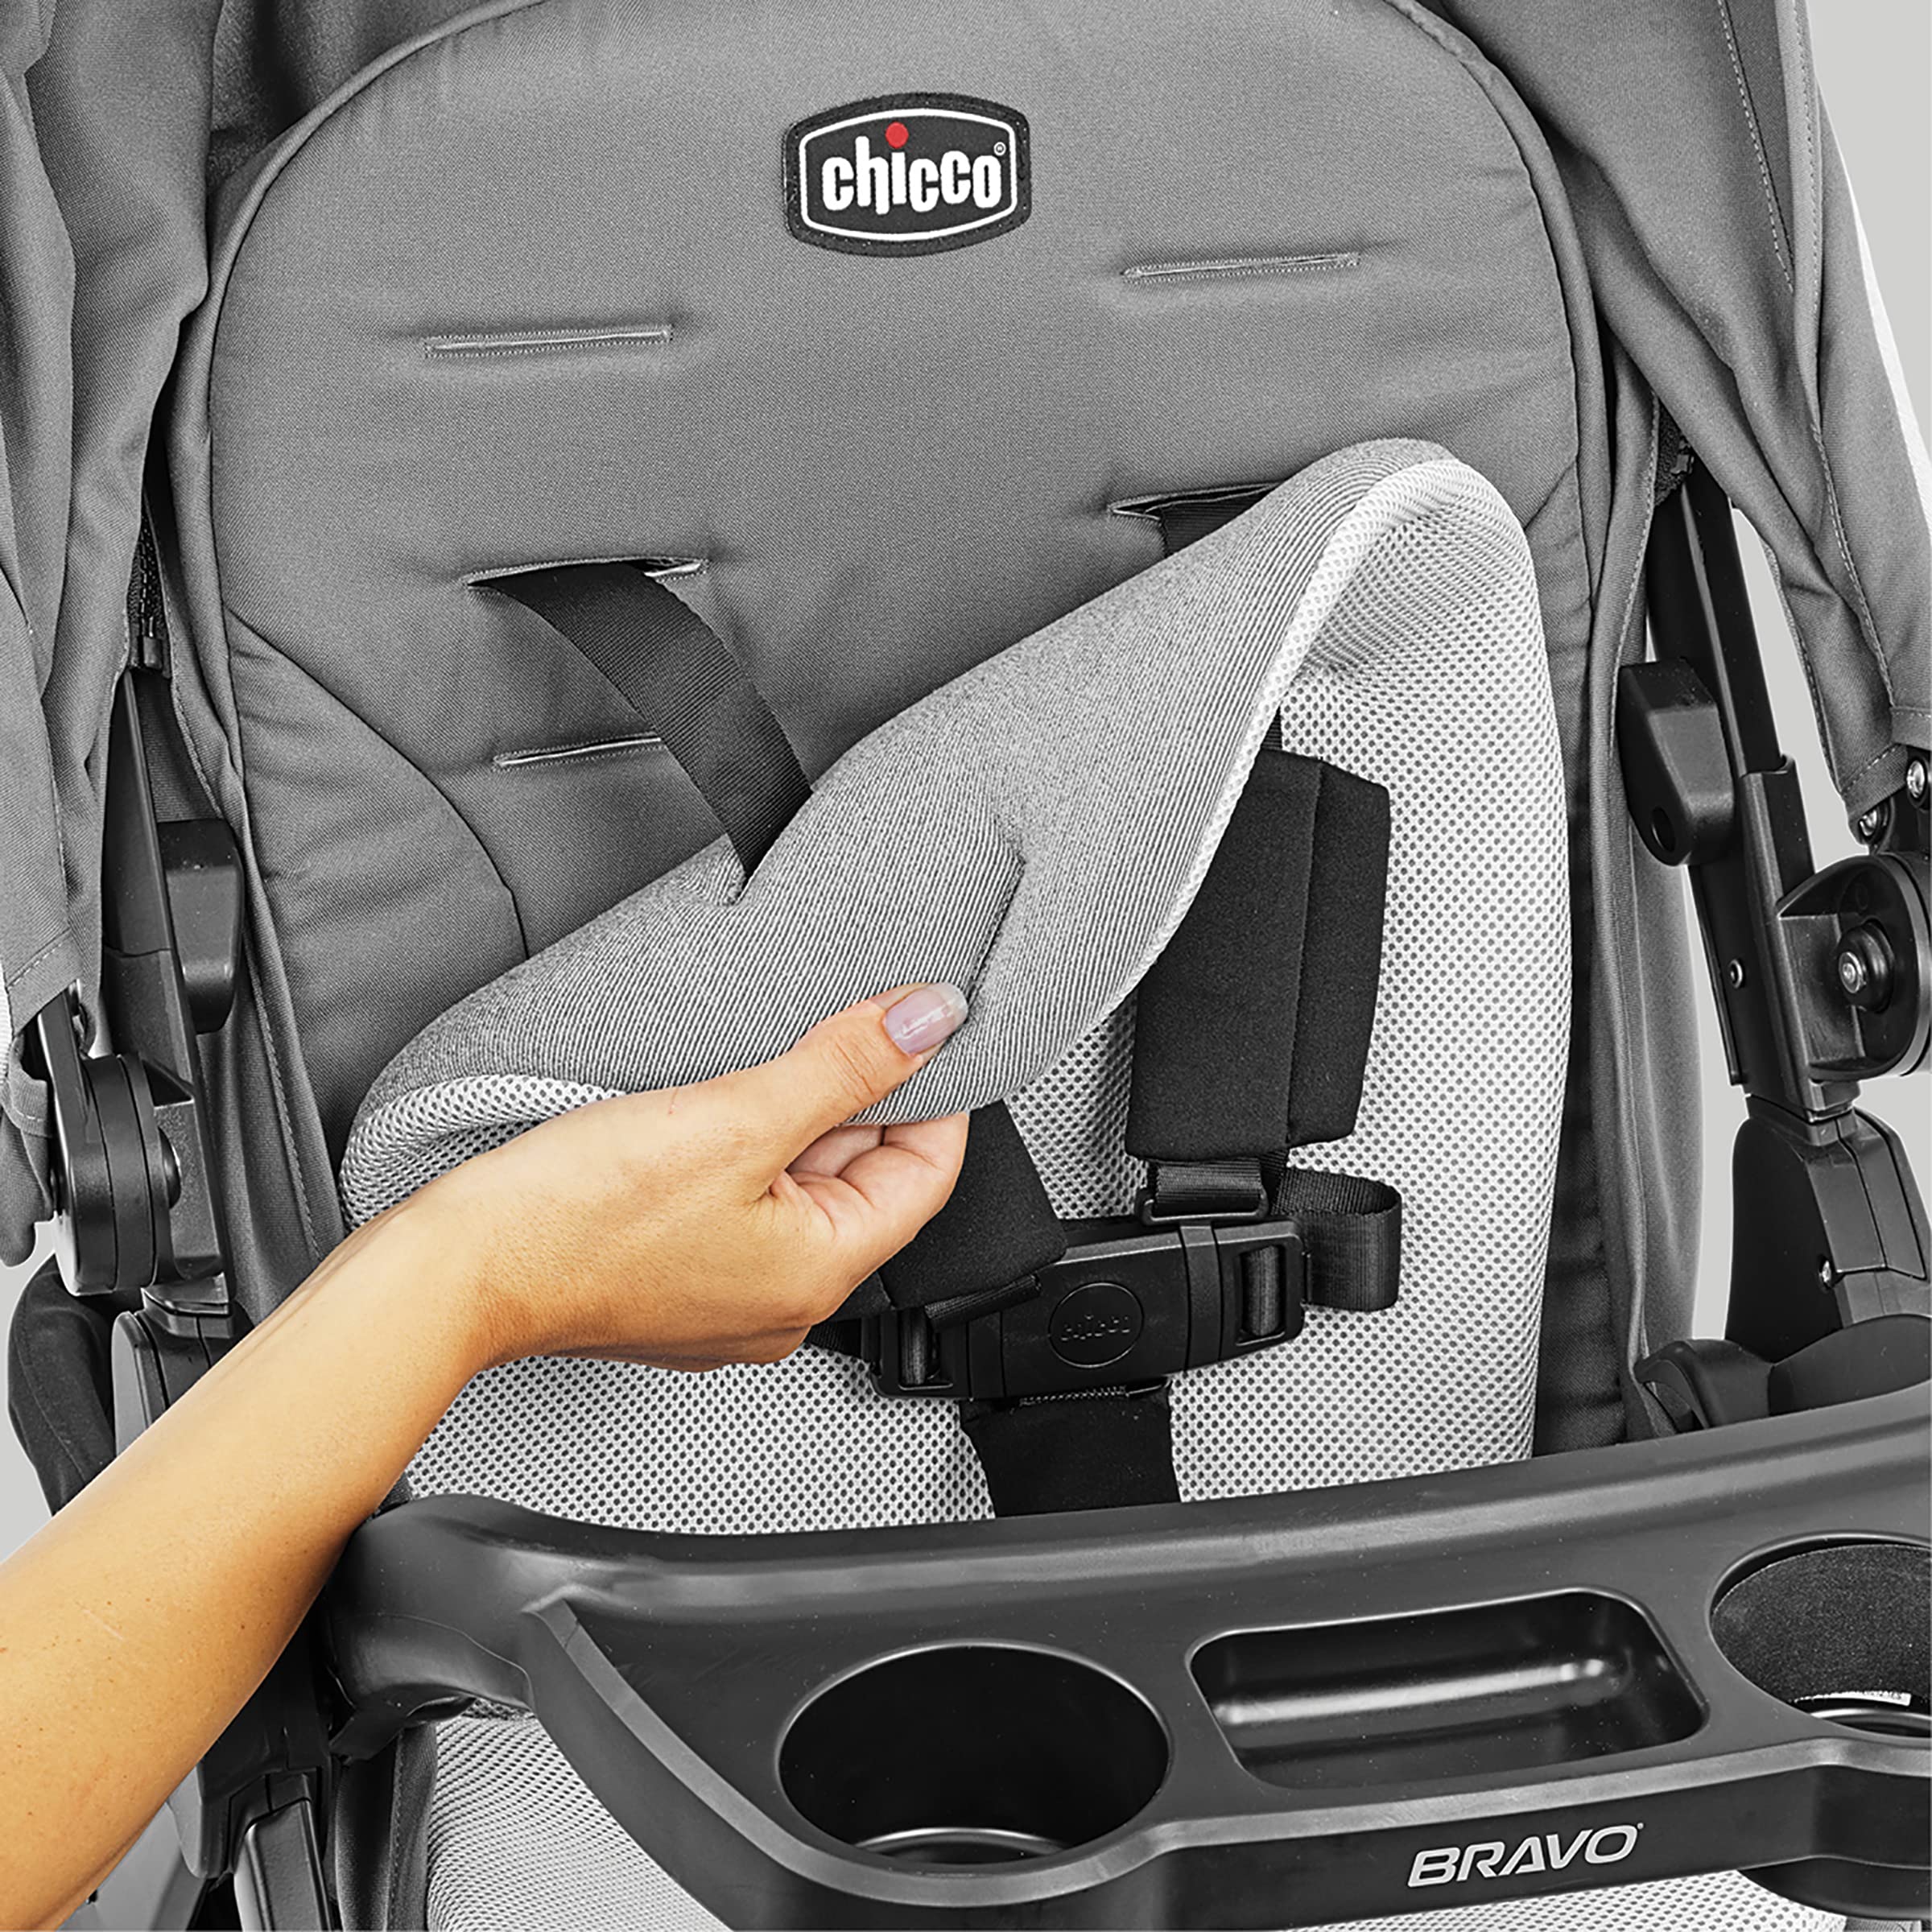 Chicco Bravo® LE Trio Travel System, Bravo® LE Quick-Fold Stroller with KeyFit® 30 Zip Infant Car Seat, Car Seat and Stroller Combo | Harbor/Navy